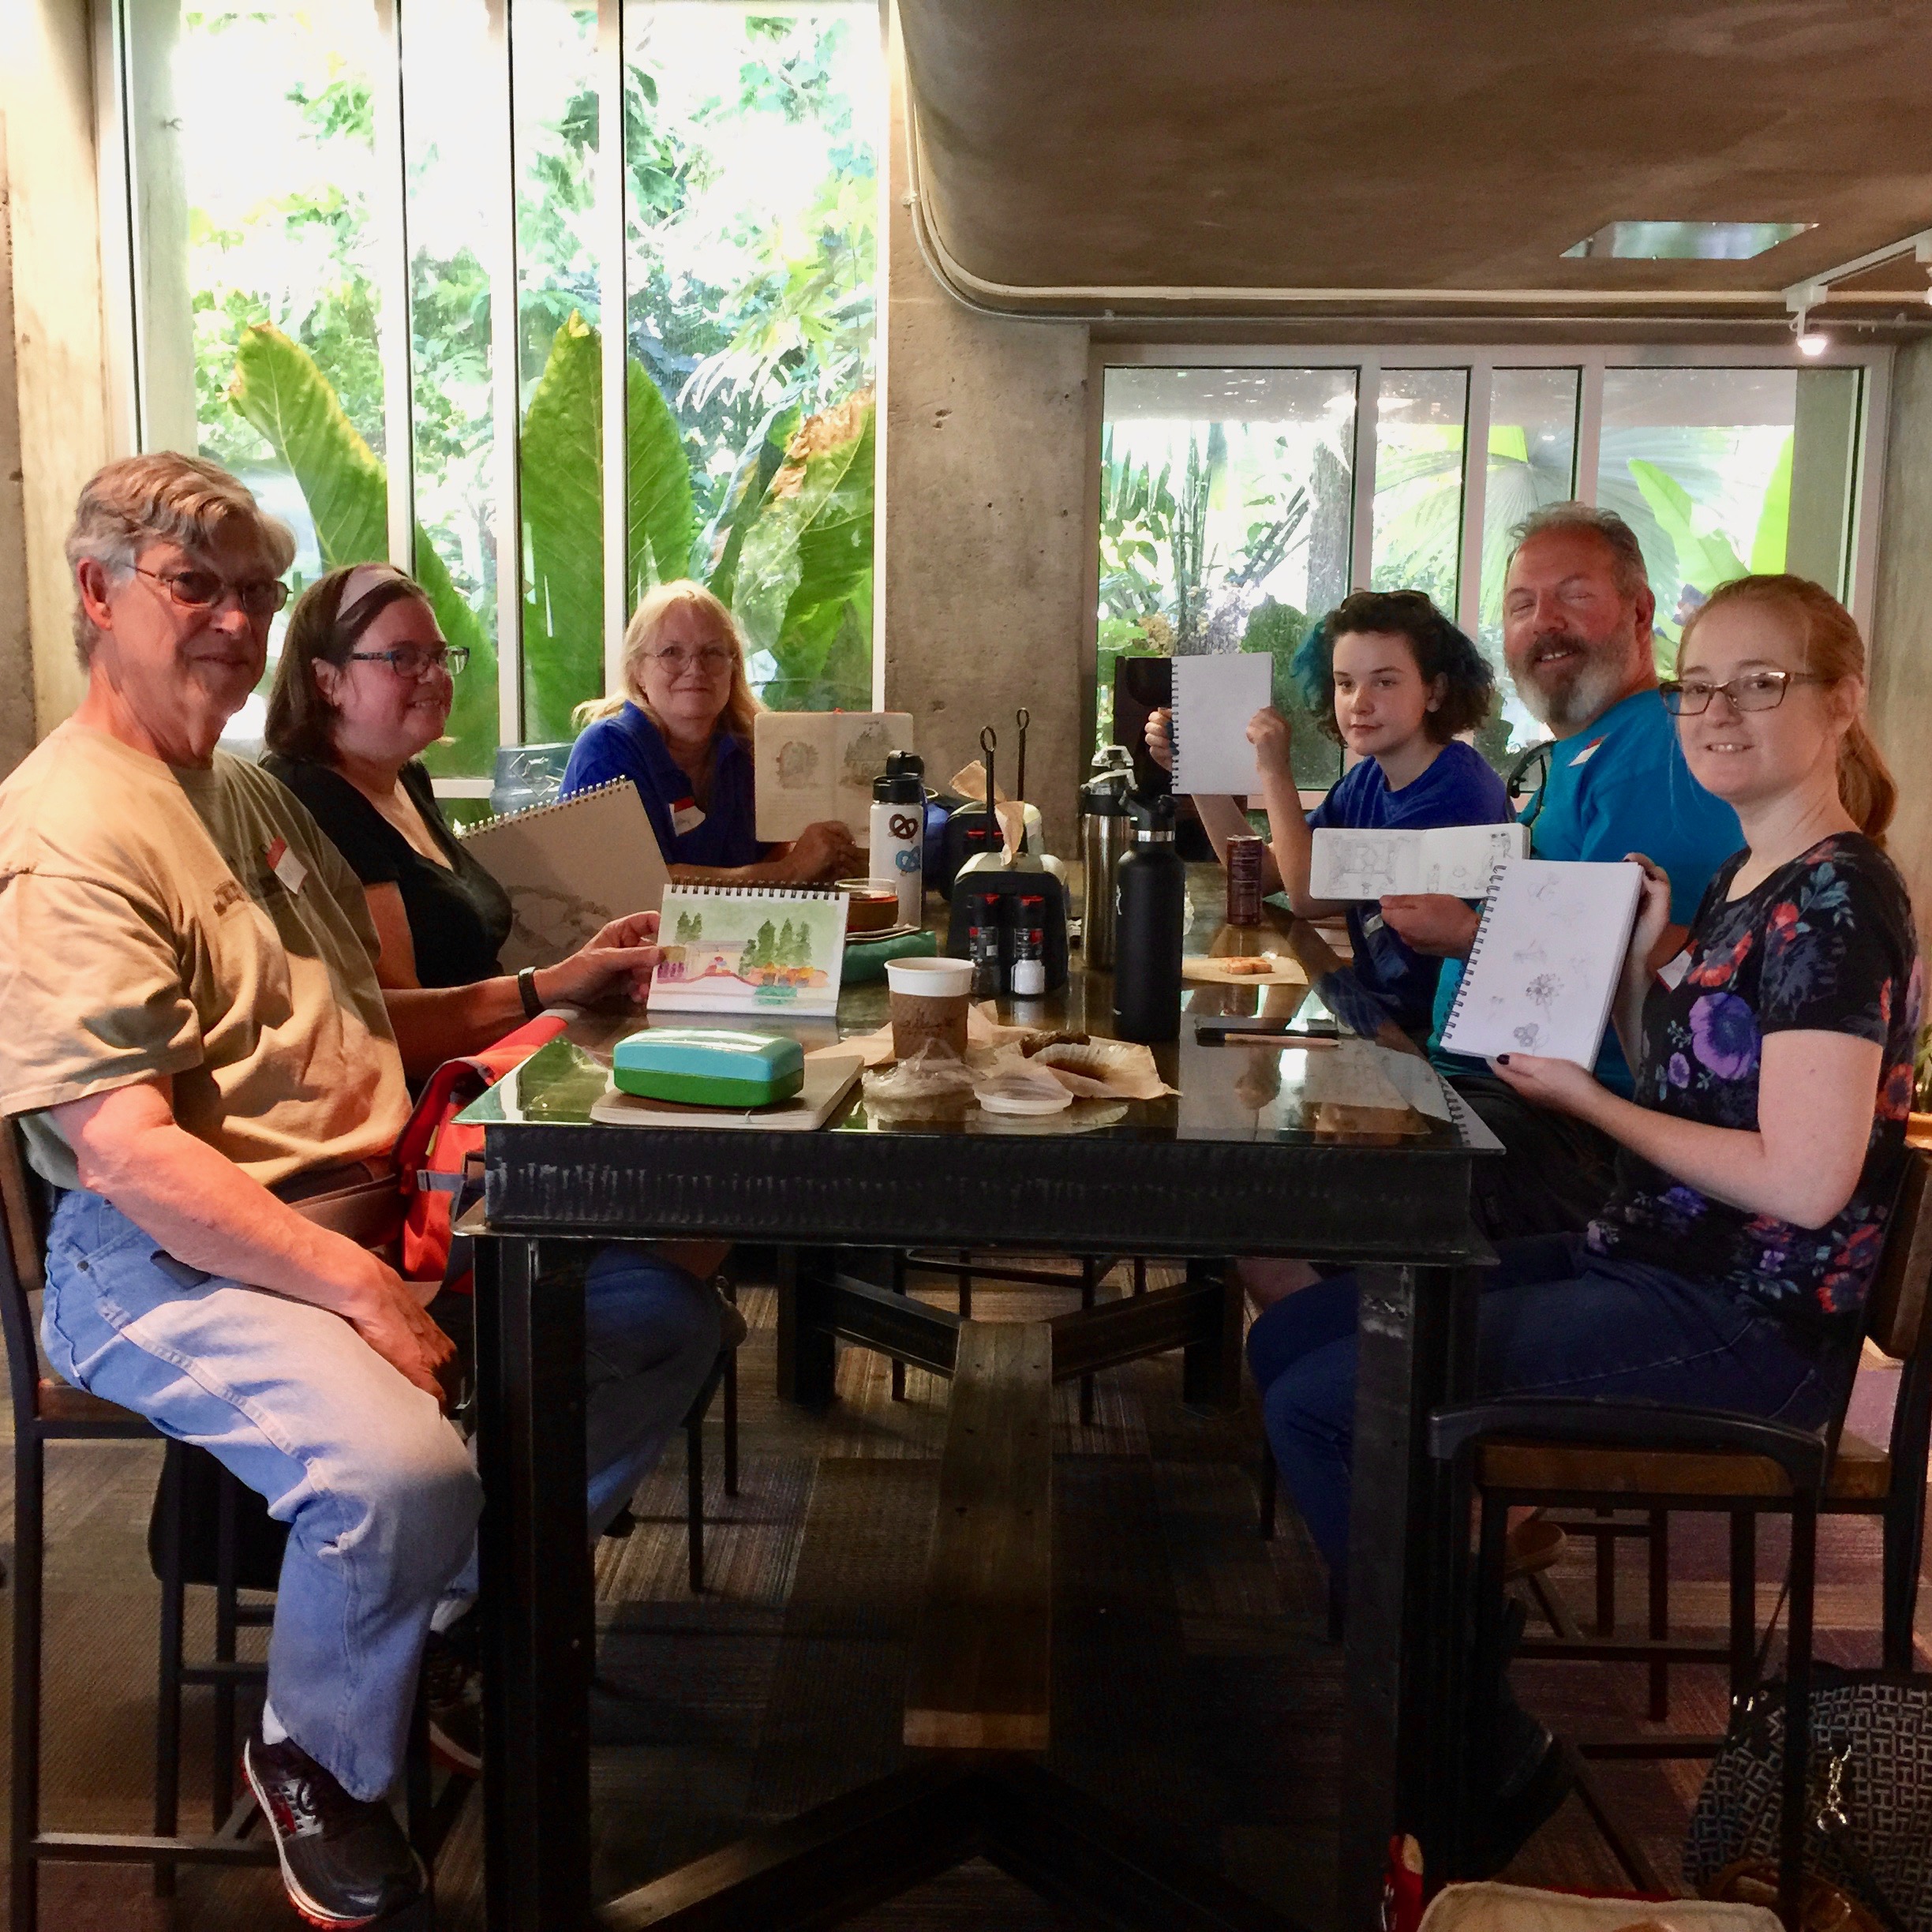 My Denver Urban Sketching Group in July at the Botanic Gardens with their sketchbooks.